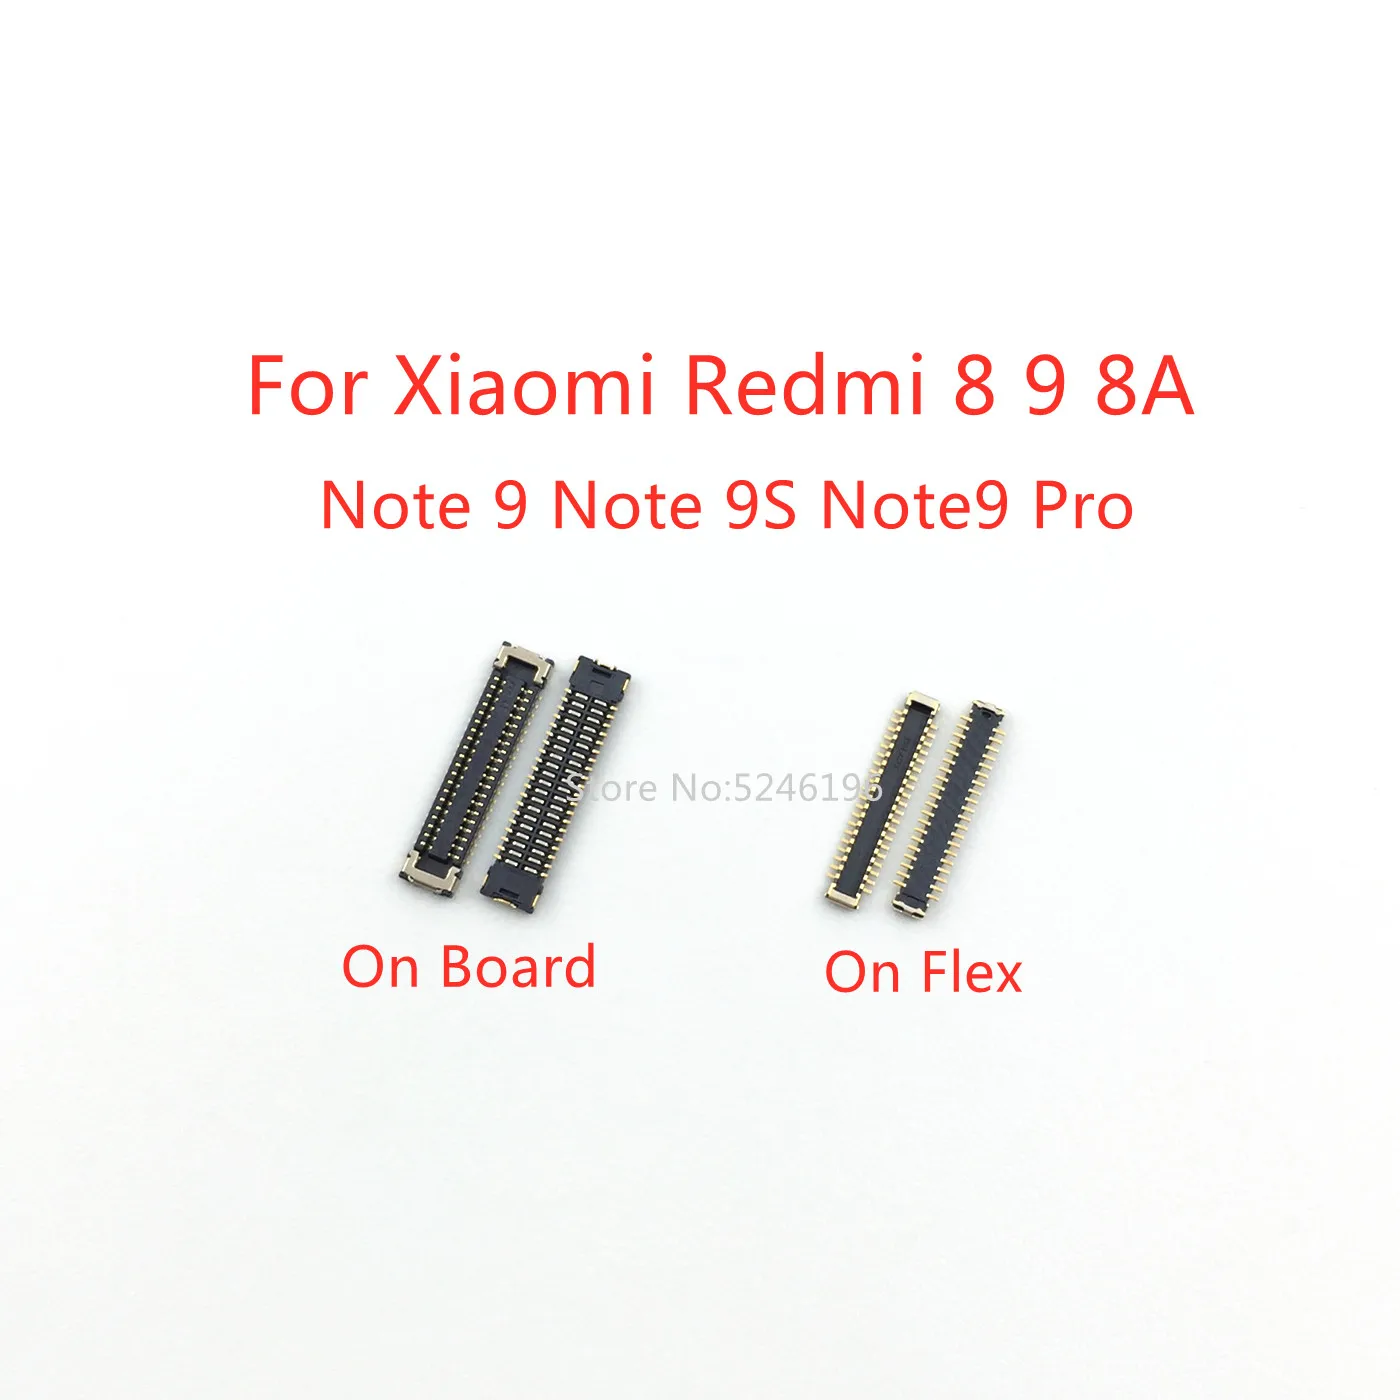 

5-10Pcs USB Charger Charging Port FPC Connector 40Pin For Xiaomi Redmi 8 8A 9 Note9 Note9S Note9Pro Note 9 9S 9Pro Plug On Board